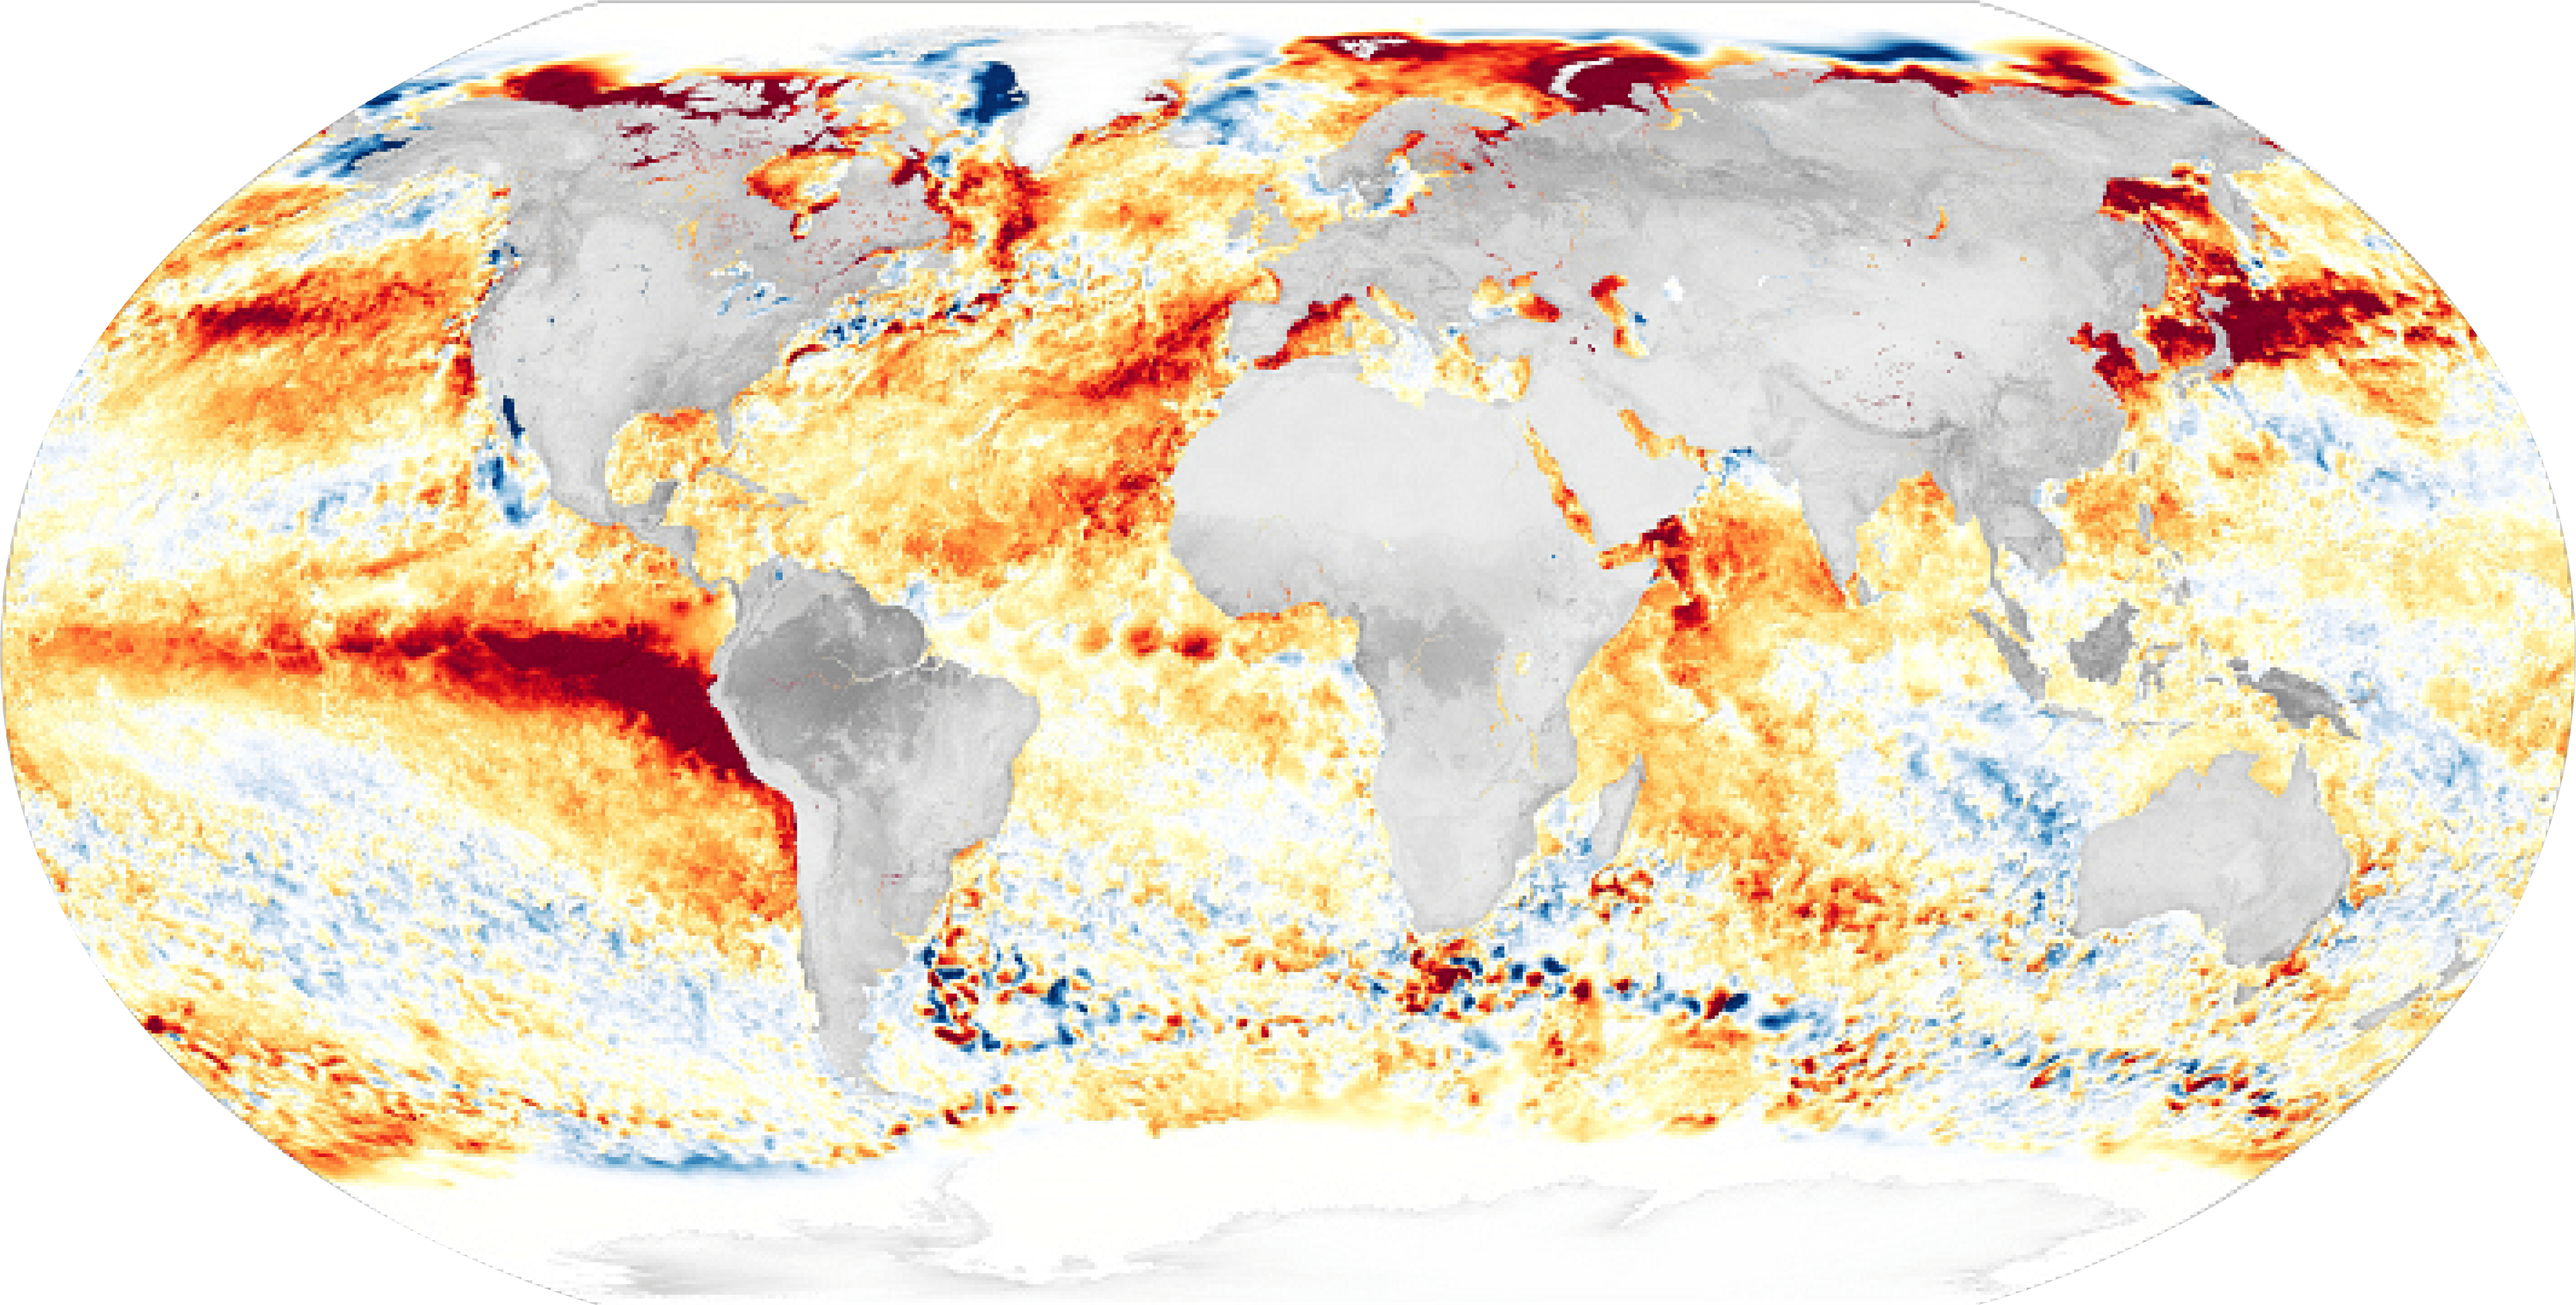 The map above shows sea surface temperature anomalies on August 21, 2023, when many areas were more than 3°C (5.4°F) warmer than normal. On that date, much of the central and eastern regions of the equatorial Pacific were unusually warm, the signature of a developing El Niño. As has been the case for weeks, large patches of warm water were also present in the Northwest Pacific near Japan and the Northeast Pacific near California and Oregon. Portions of the Indian, Southern, and Arctic Oceans also showed unusual warmth.